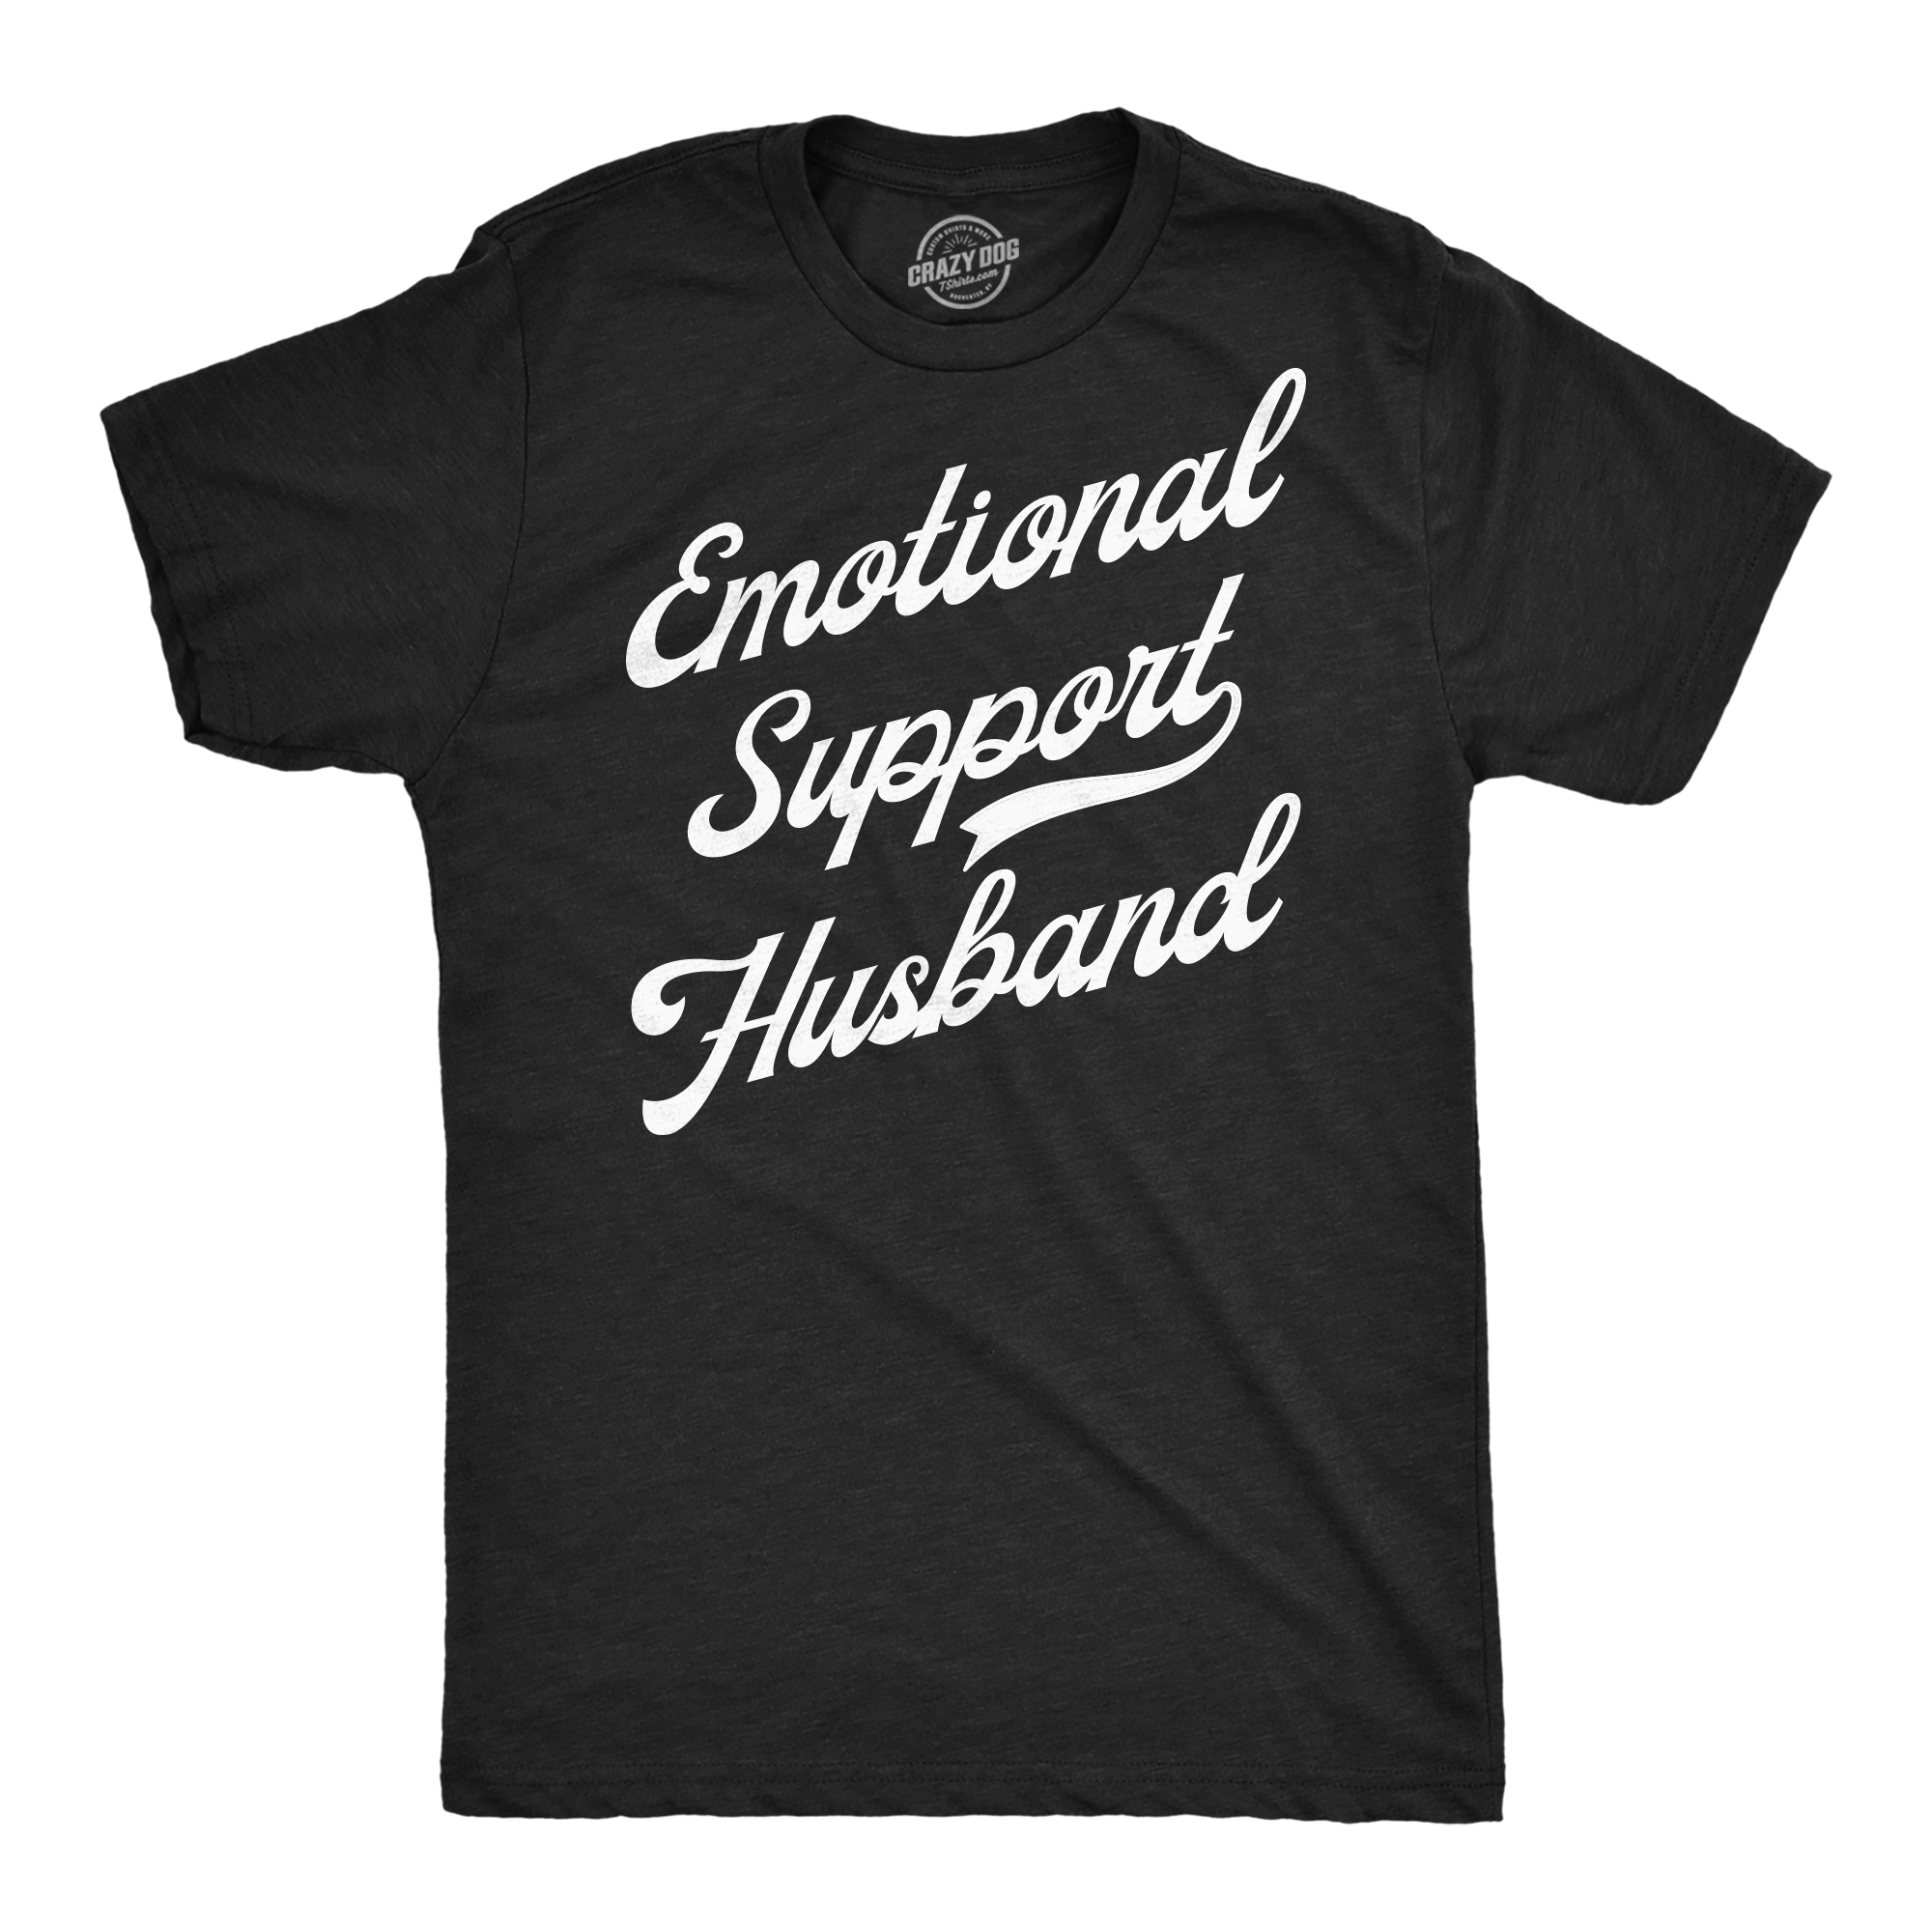 Funny Heather Black - Emotional Support Husband Emotional Support Husband Mens T Shirt Nerdy sarcastic Tee